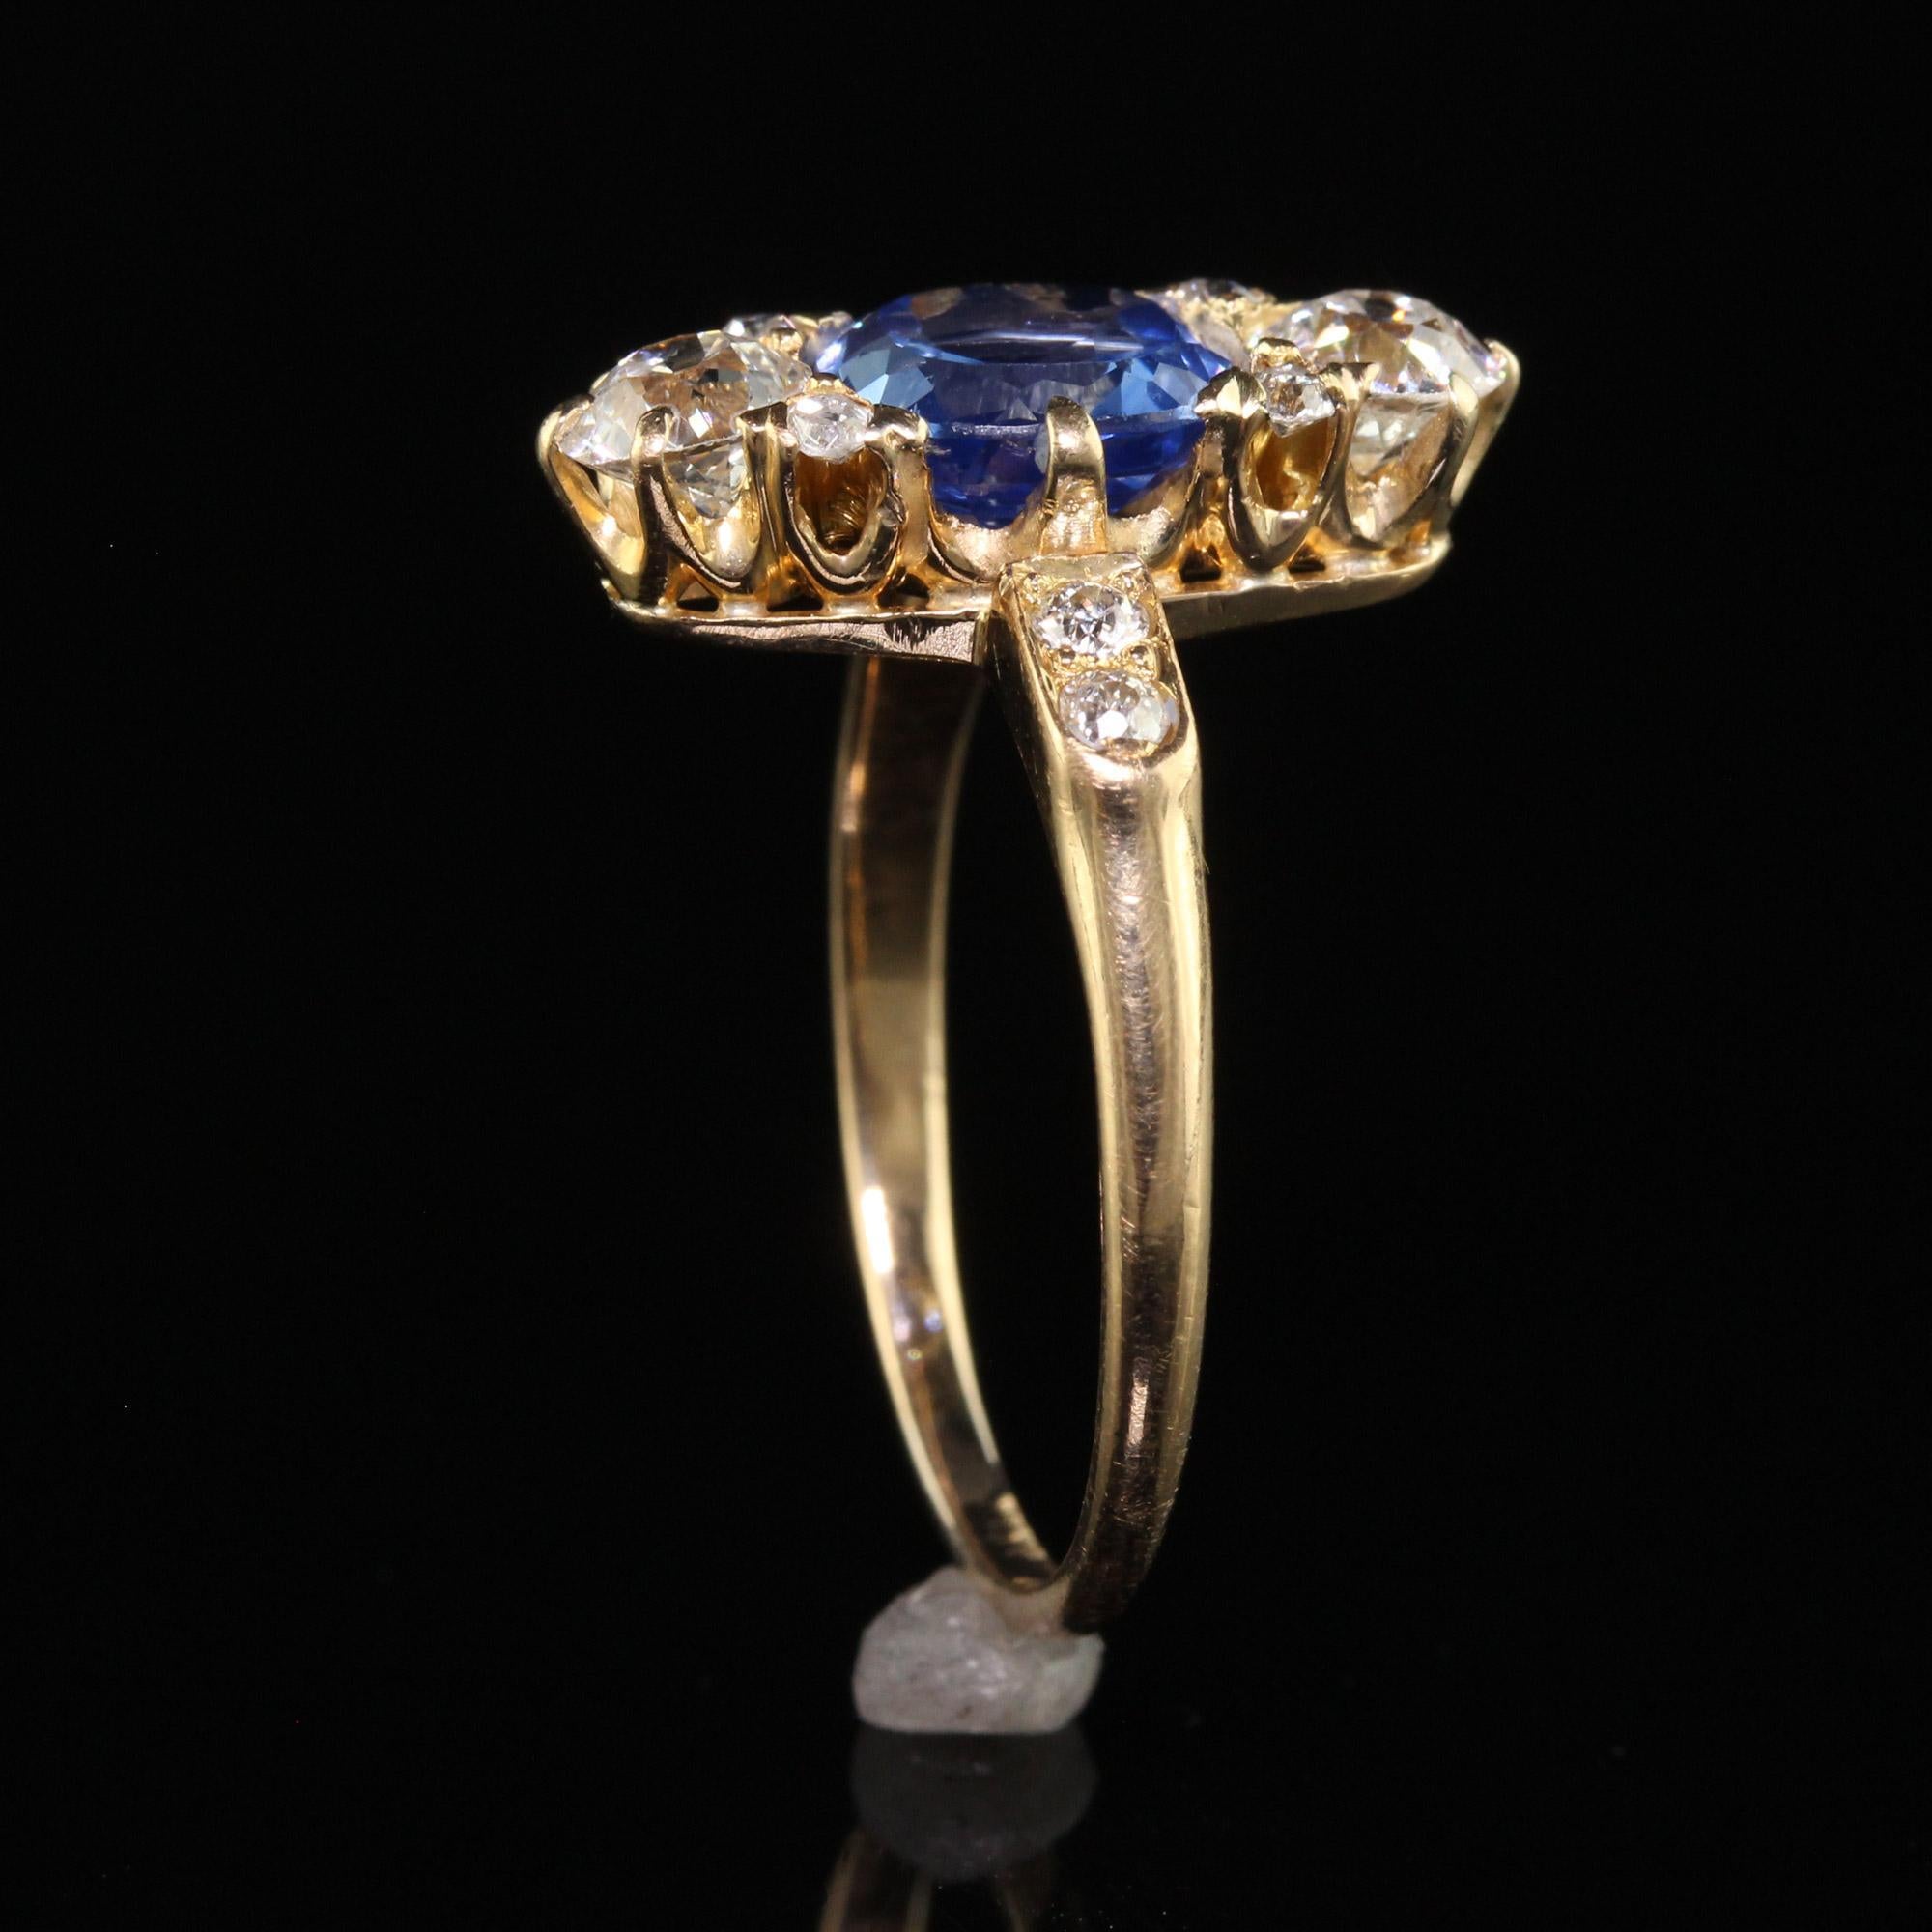 Antique Art Deco Bailey Banks Biddle 18K Yellow Gold Sapphire Diamond Ring - GIA For Sale 2